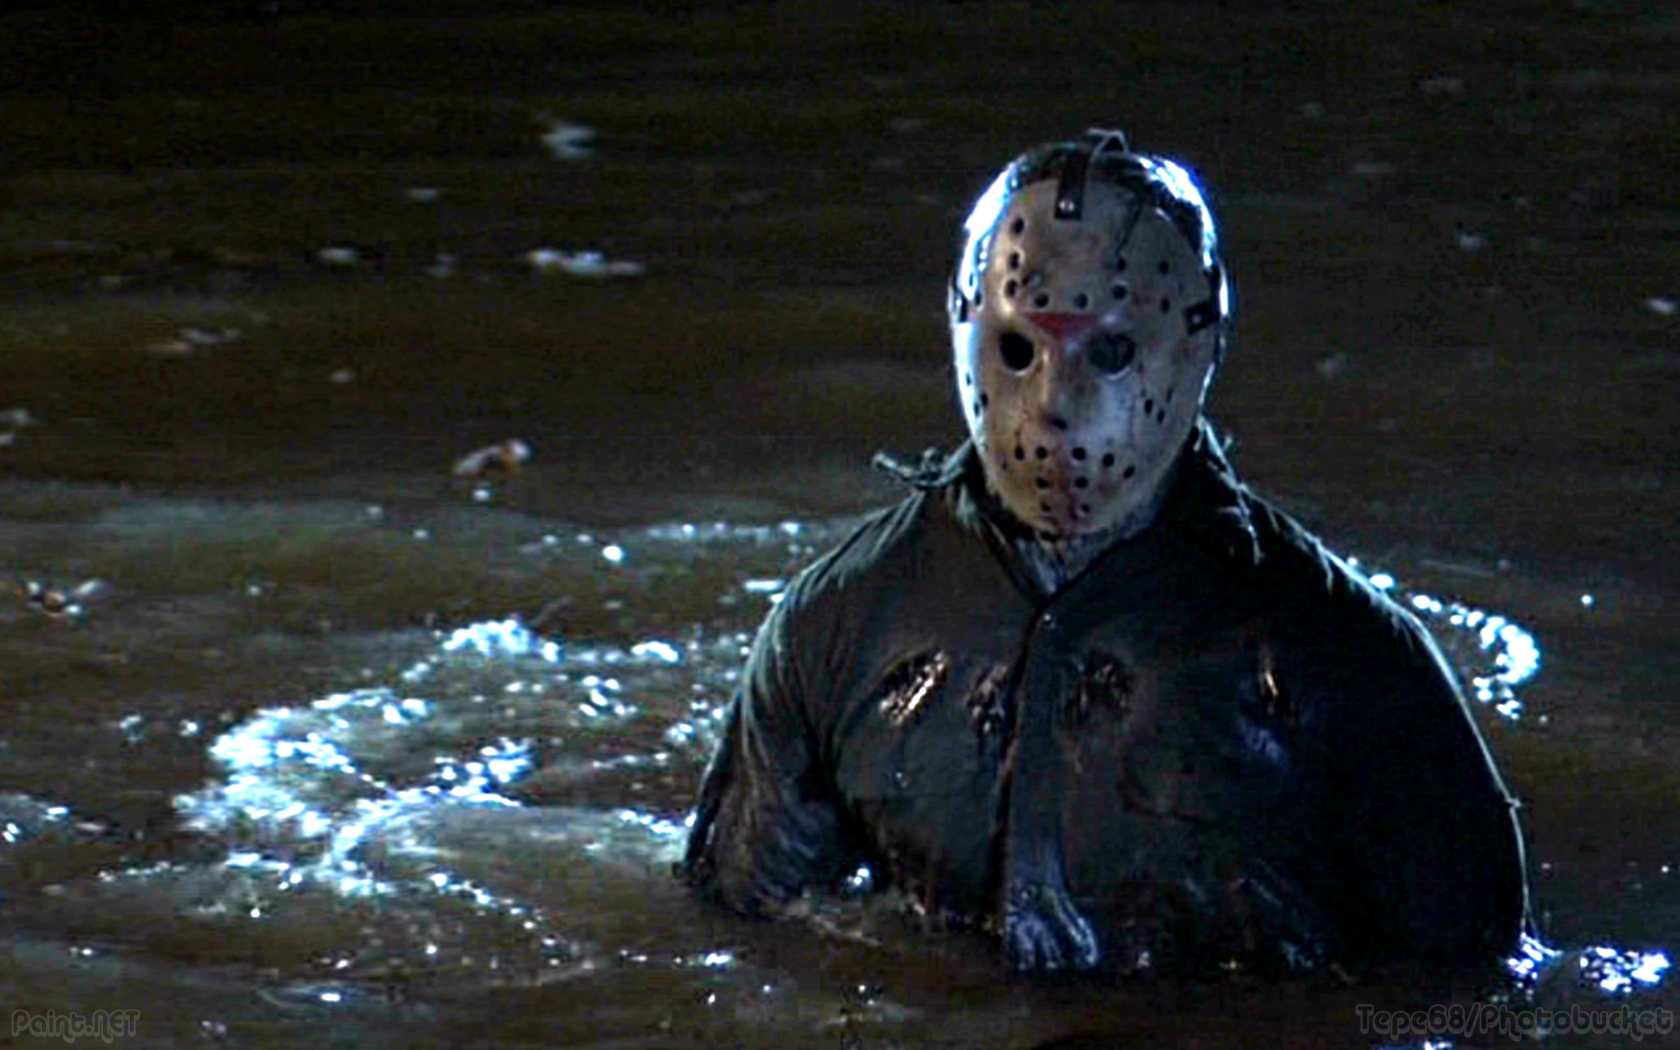 Jason Voorhees, Friday the 13th 13 Horror Villain Costume Ideas That